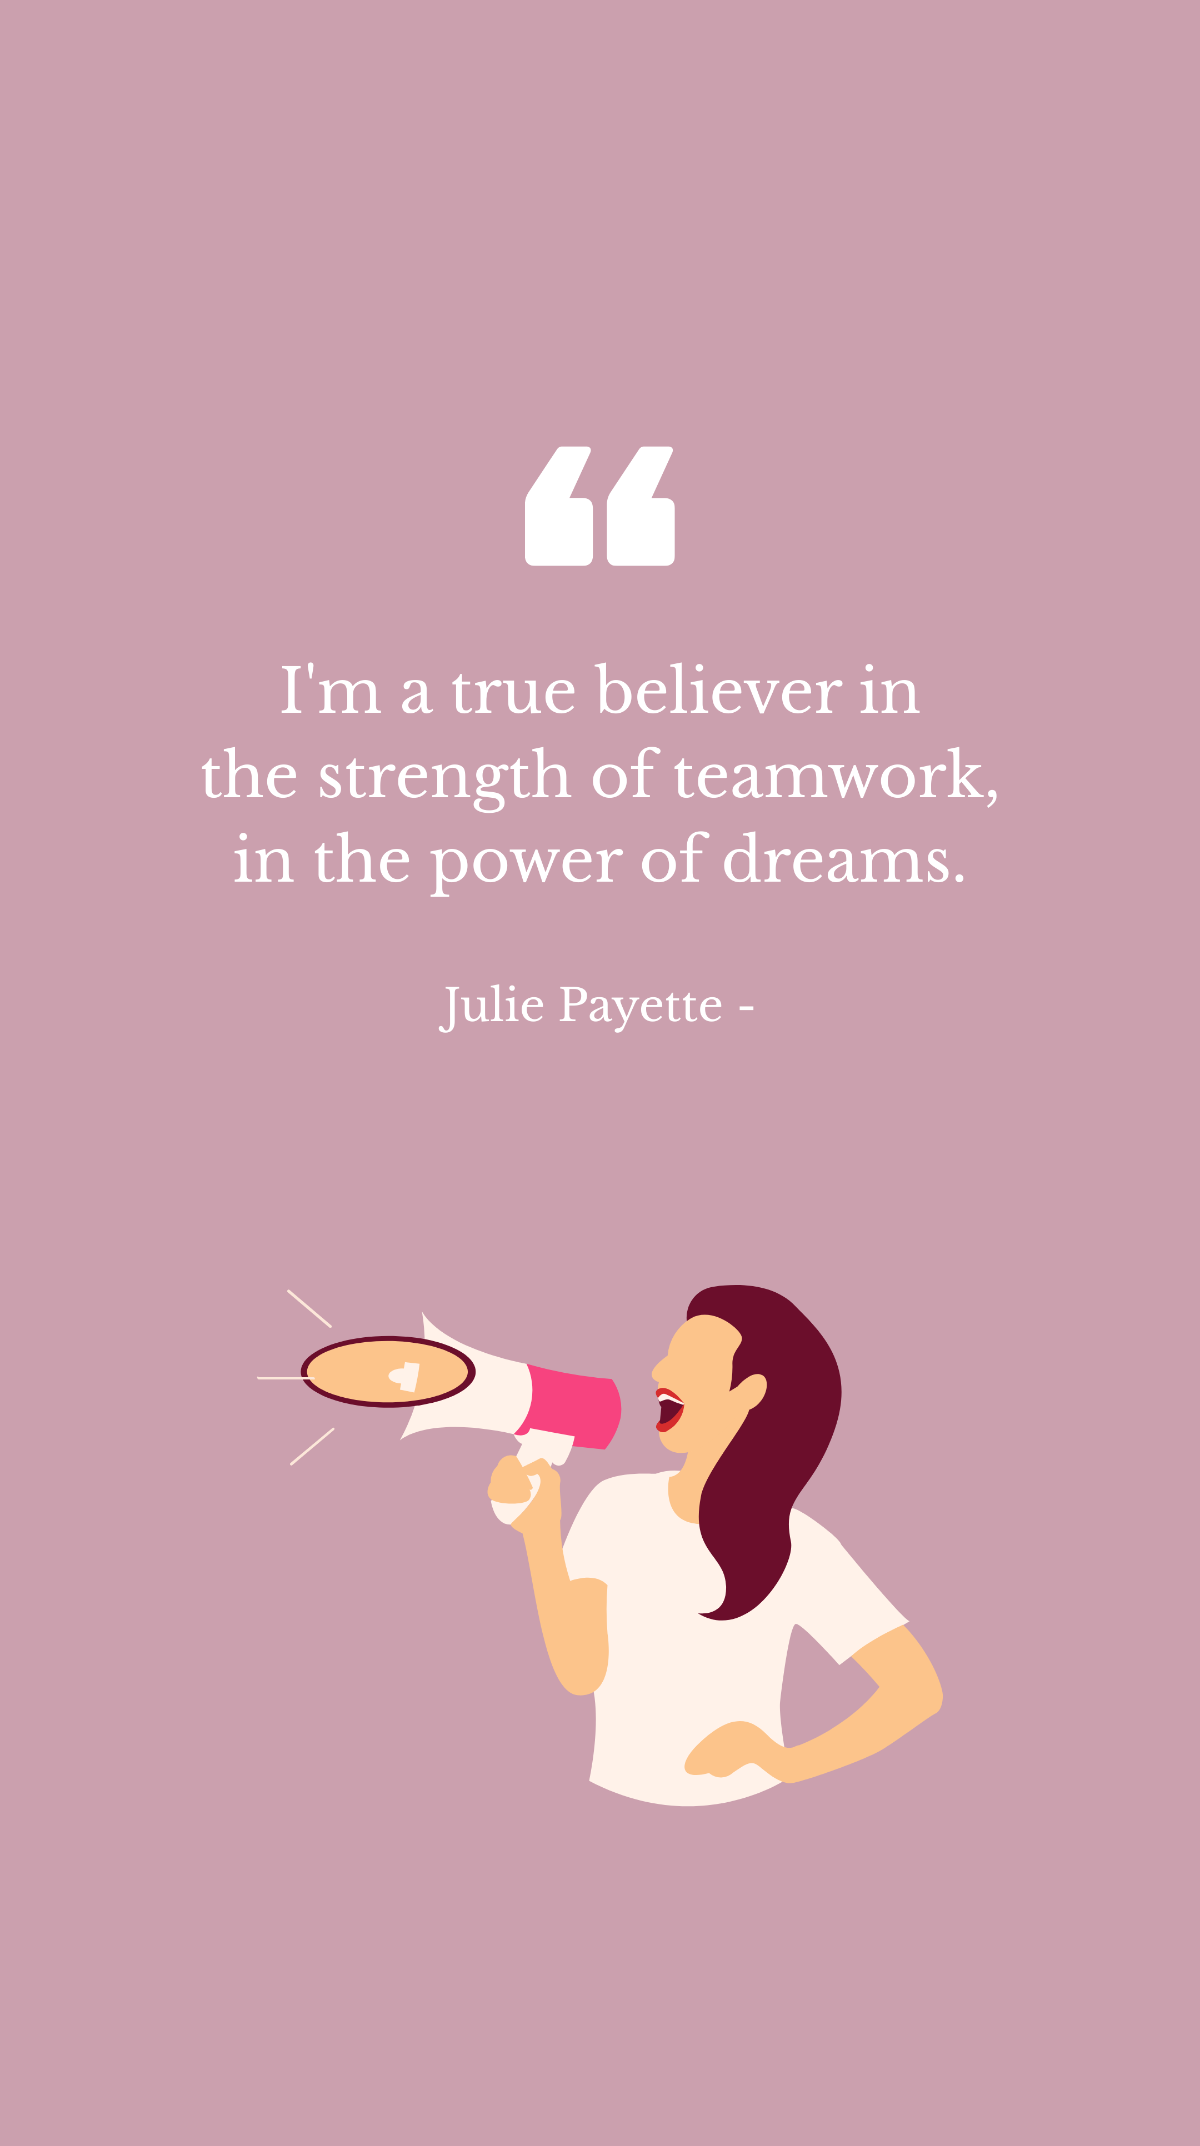 Julie Payette - I'm a true believer in the strength of teamwork, in the power of dreams. Template